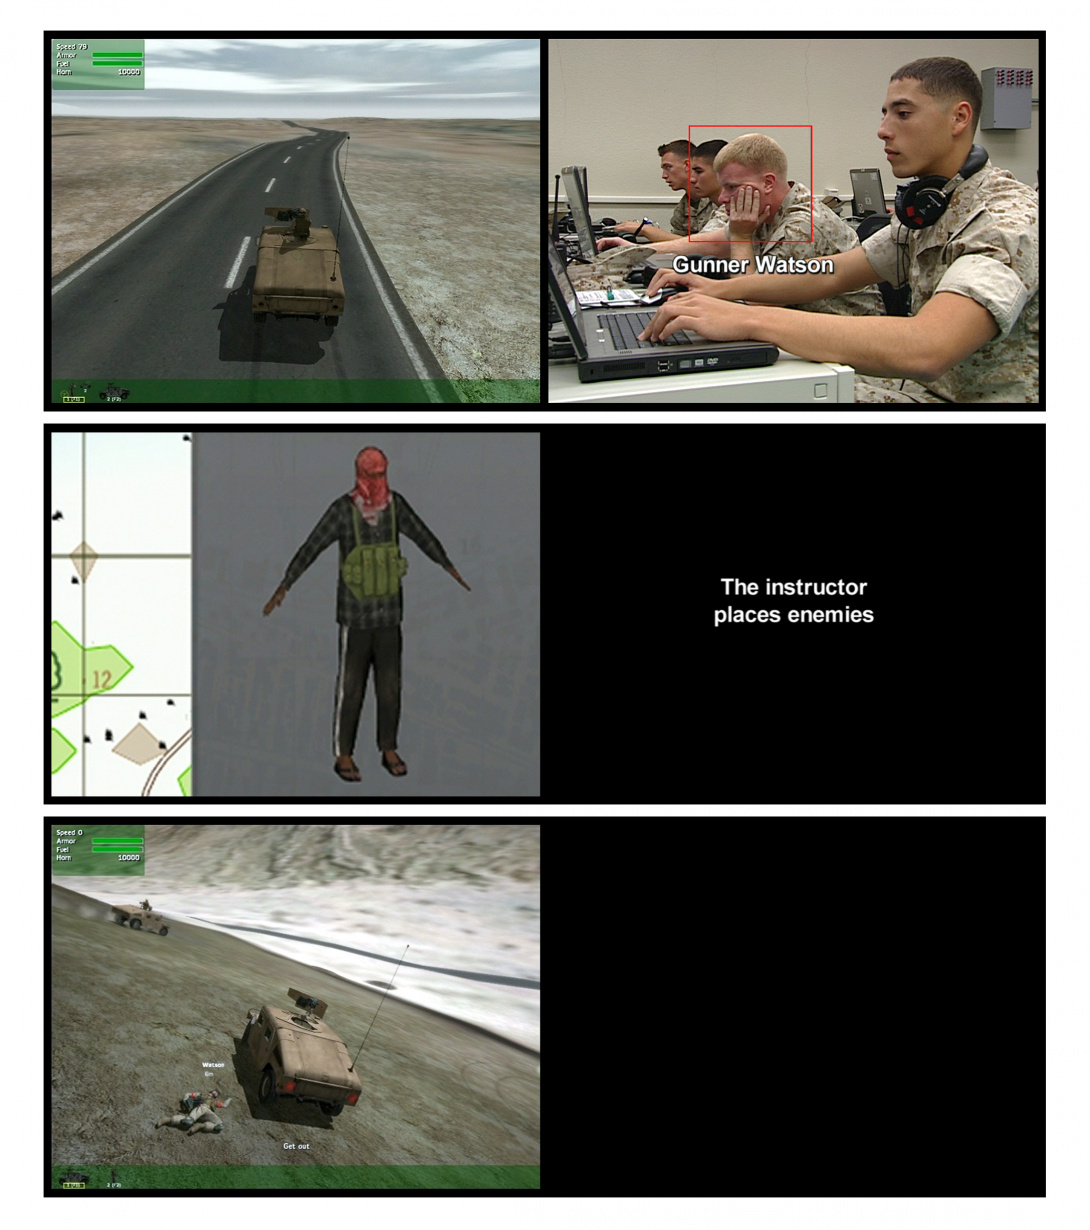 Two columns—one displays video game stills and the photographs of men in fatigues at desks. A video displays images of war: tanks and stereotypical bad guys. The army men study the simulations.